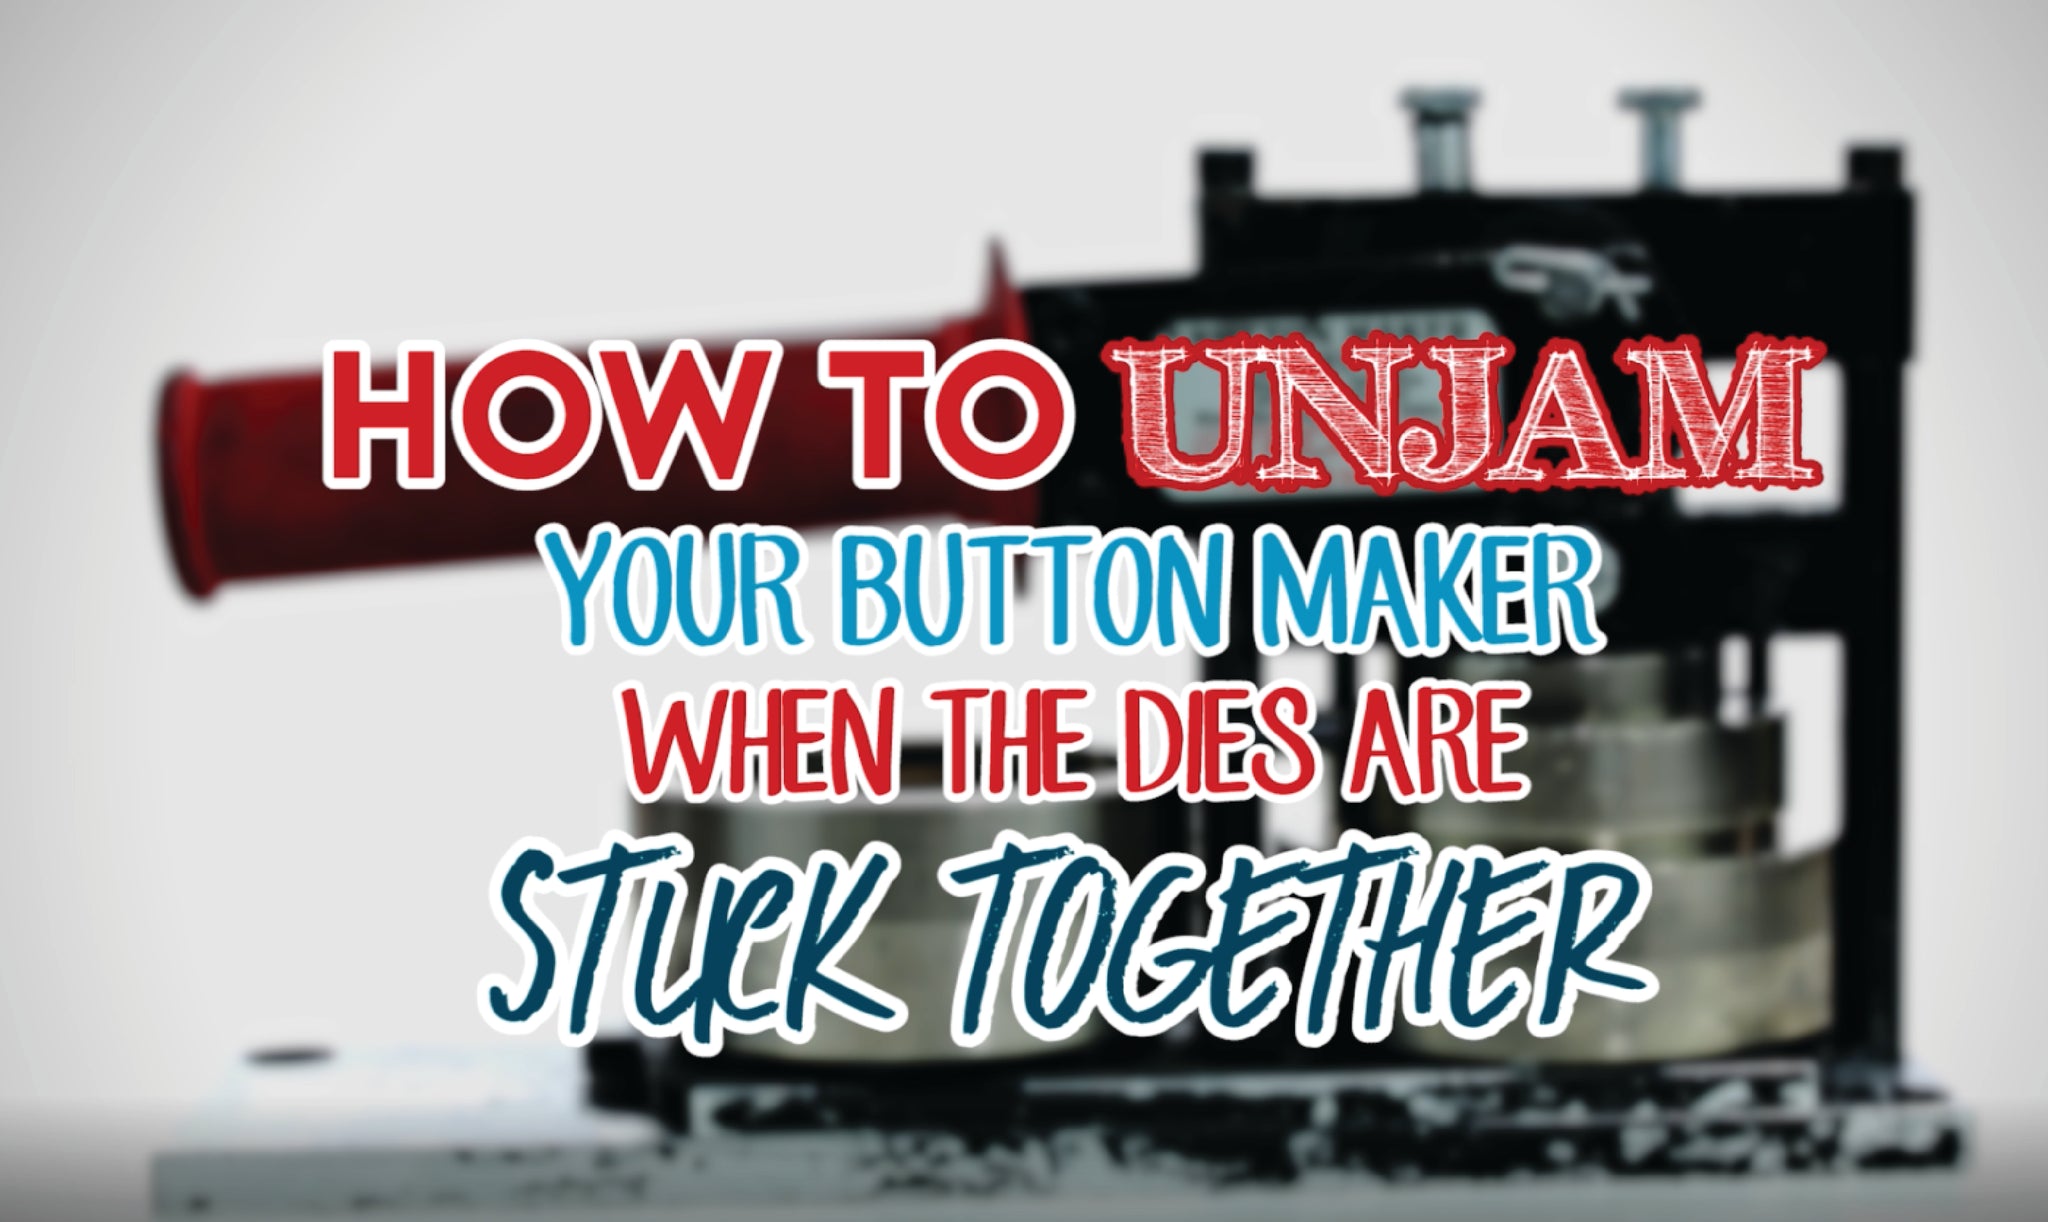 How to Unjam Your Button Maker, Button Guy Video, How-To Video, Button Making Parts & Supplies by People Power Press, 